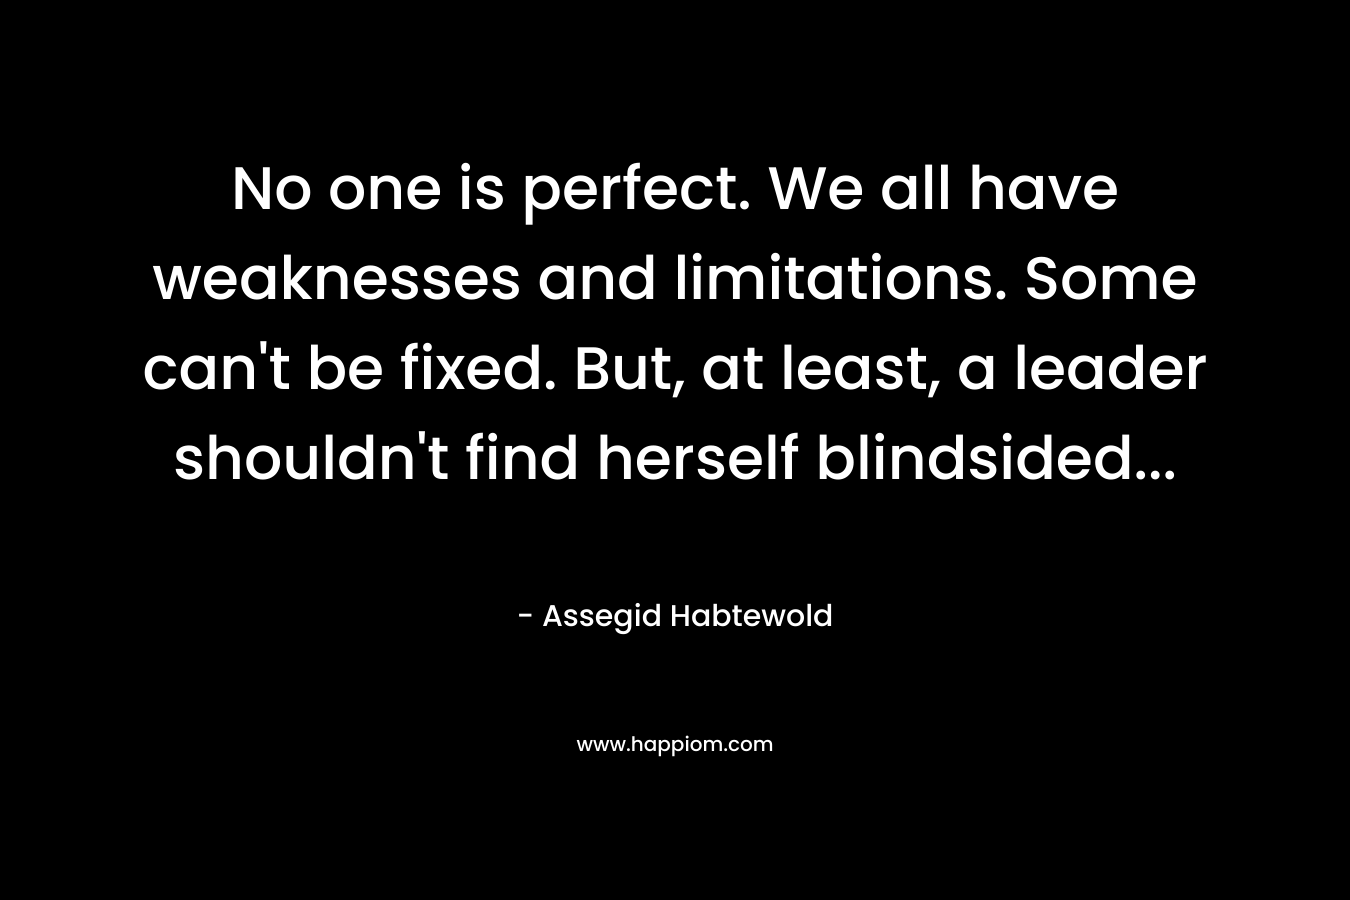 No one is perfect. We all have weaknesses and limitations. Some can’t be fixed. But, at least, a leader shouldn’t find herself blindsided… – Assegid Habtewold